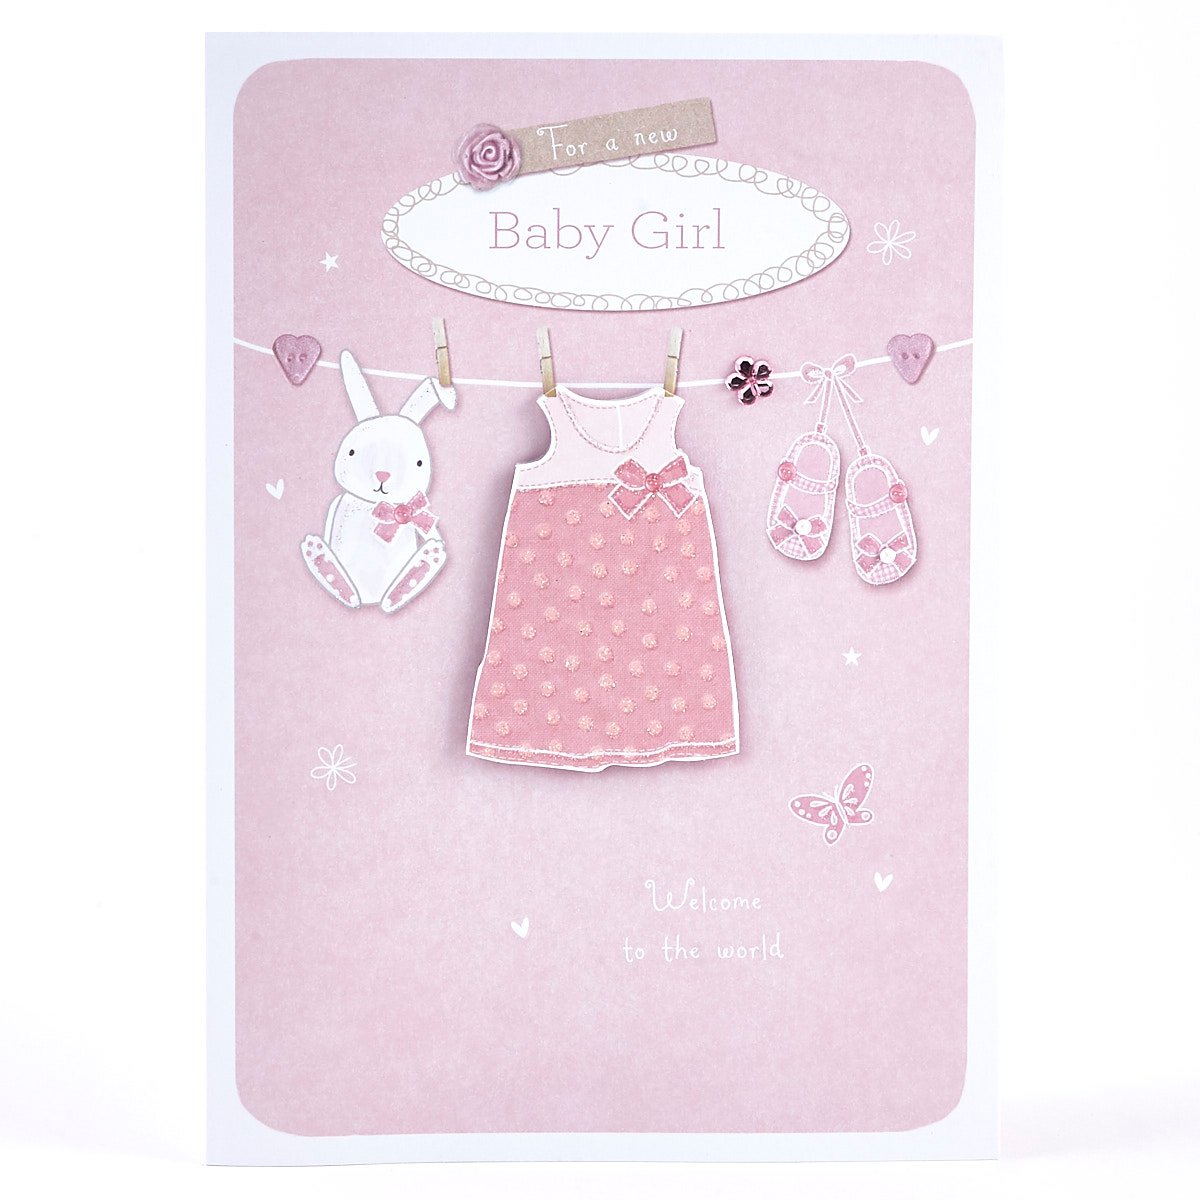 New Baby Girl Card - Clothes Line